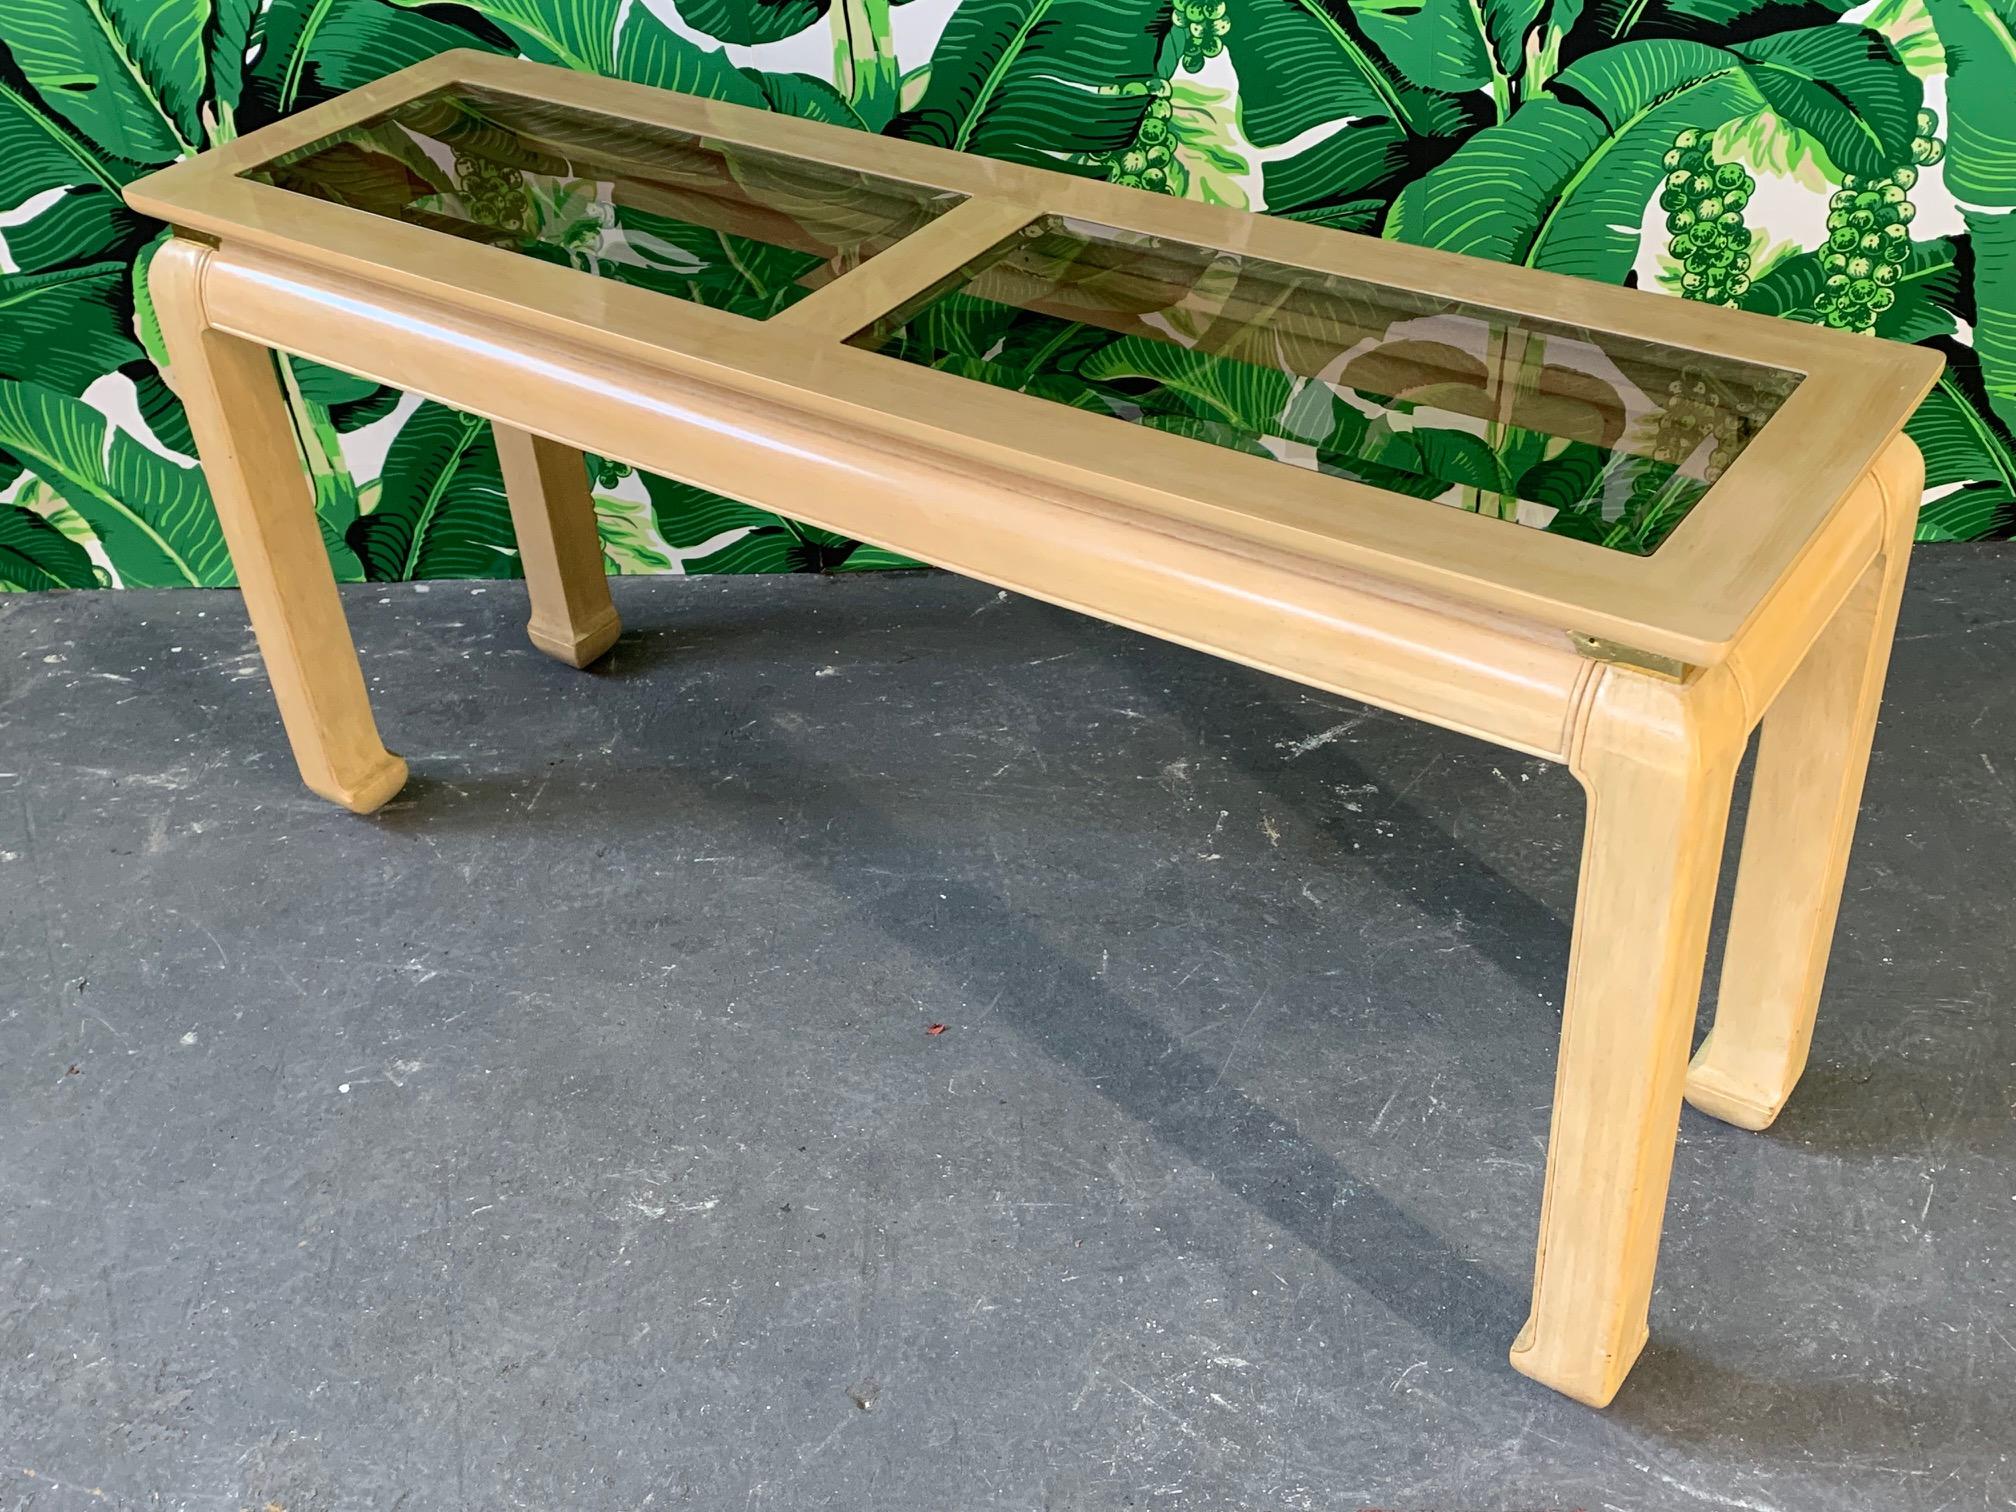 Ming Asian console table by Bernhardt features beveled smoked glass inserts and brass detailing. Very good vintage condition with minor signs of age appropriate use.